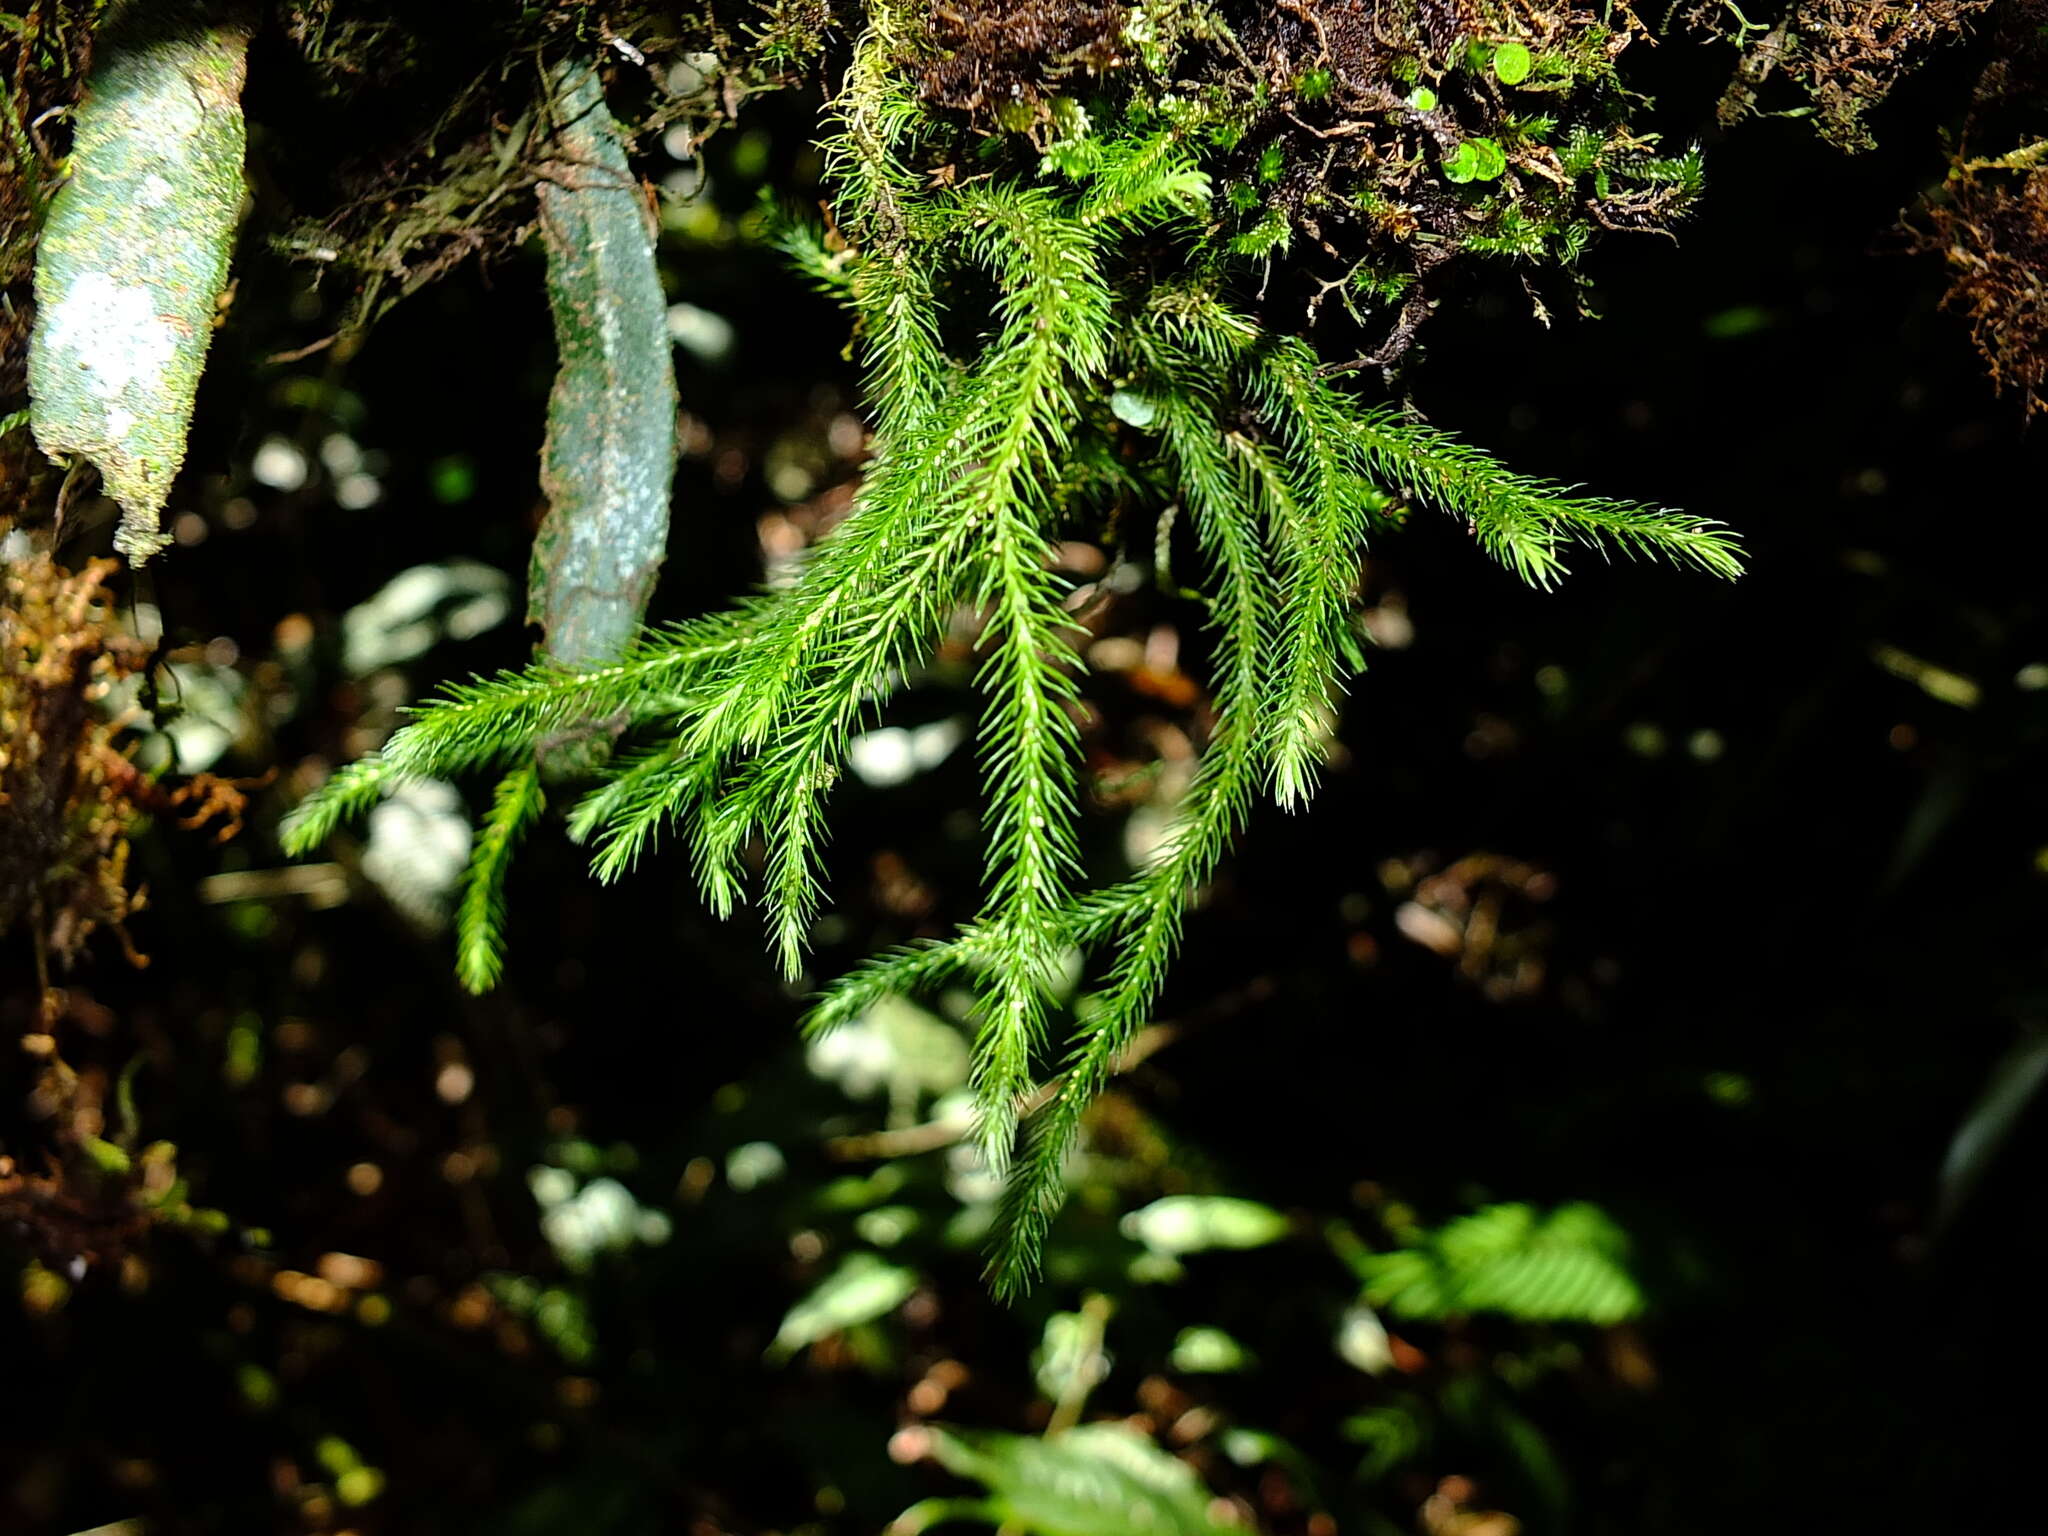 Image of Puerto Rico clubmoss